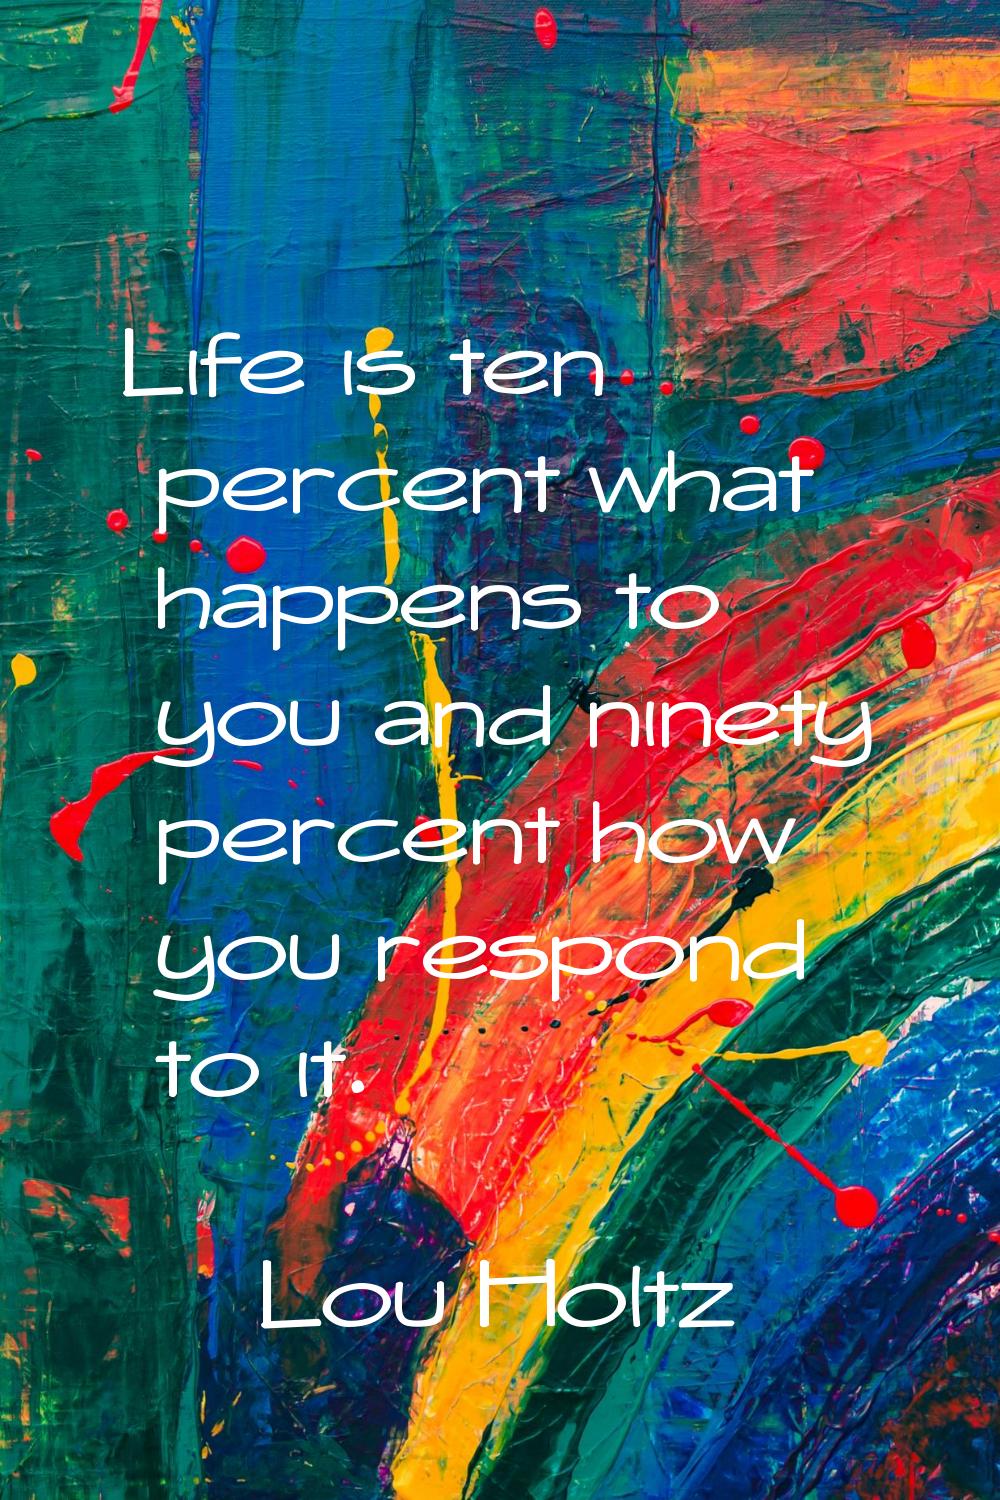 Life is ten percent what happens to you and ninety percent how you respond to it.